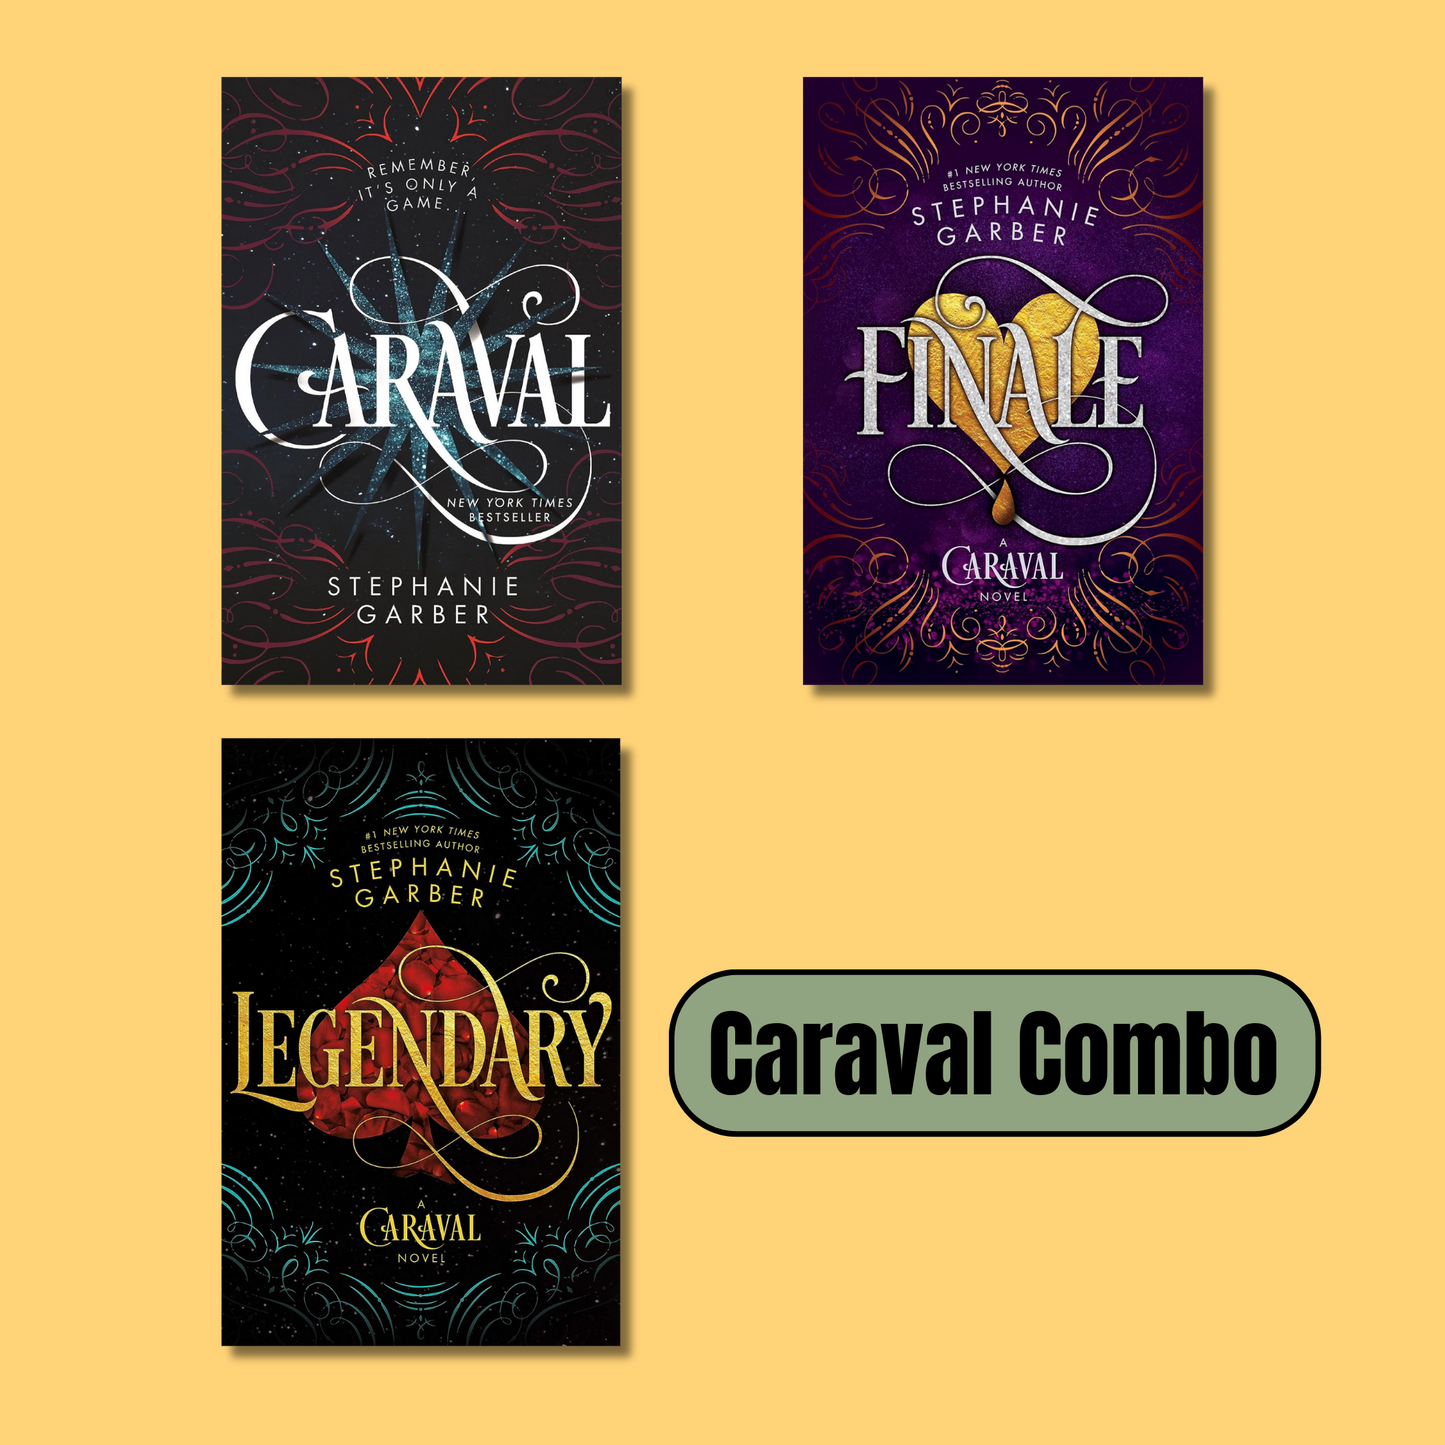 Caraval Combo by Stephanie Garber (Paperback)